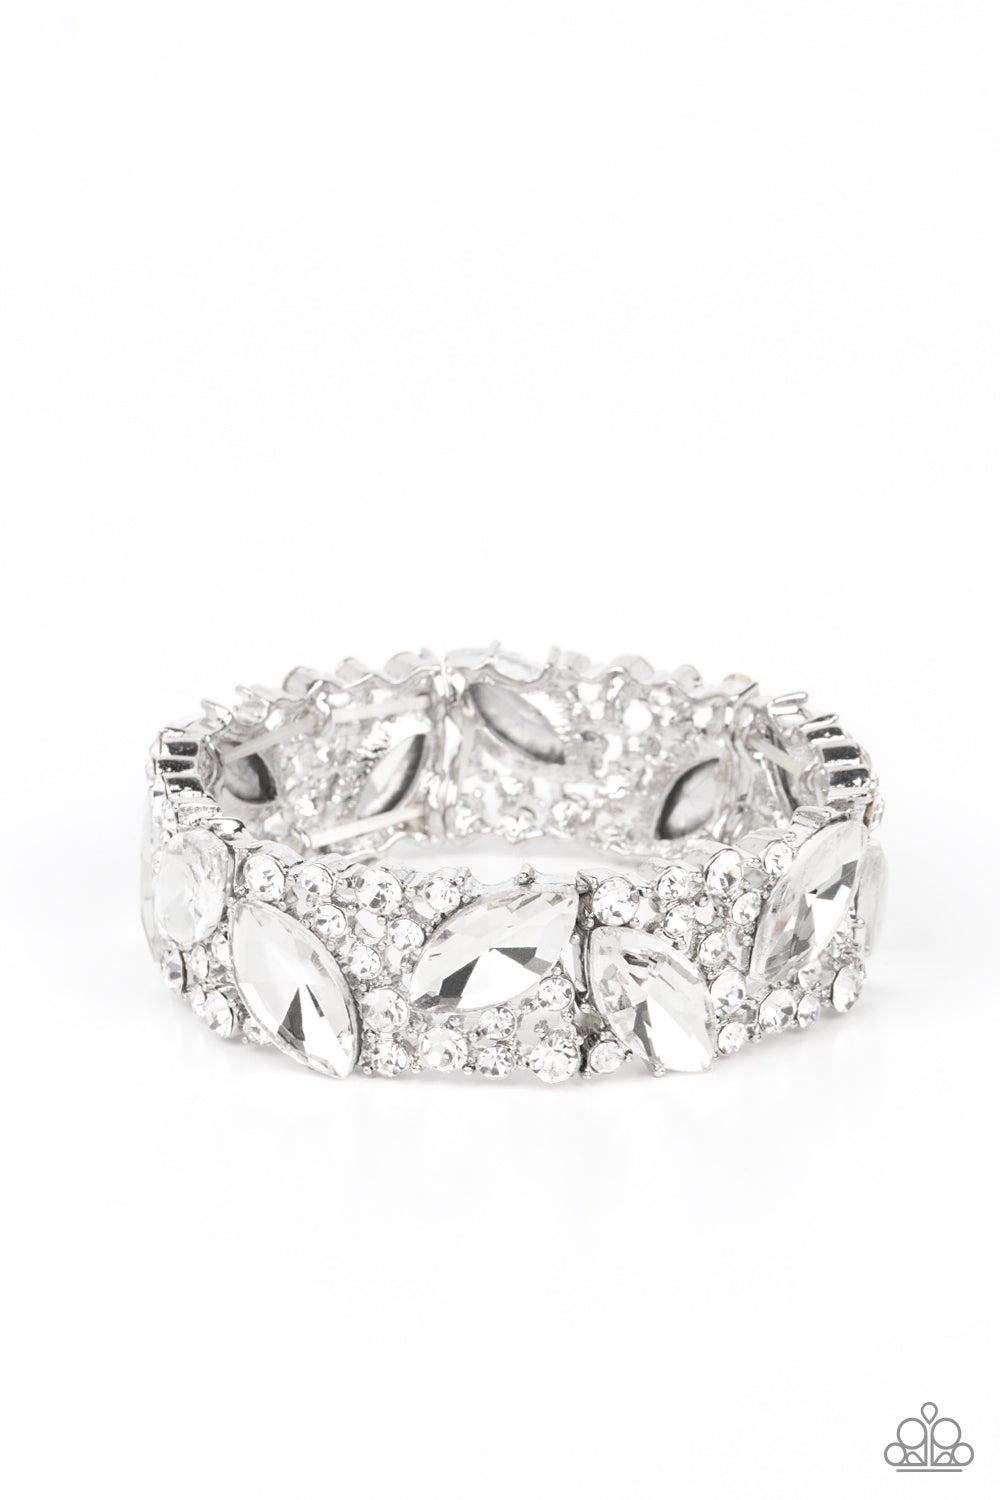 Full Body Chills - Silver - White Bling Bracelet - Paparazzi Accessories - Oversized marquise cut white rhinestones sparkle atop icy frames of dainty silver studs and white rhinestones that are threaded along stretchy bands around the wrist for a jaw-dropping dazzle fashion bracelet.